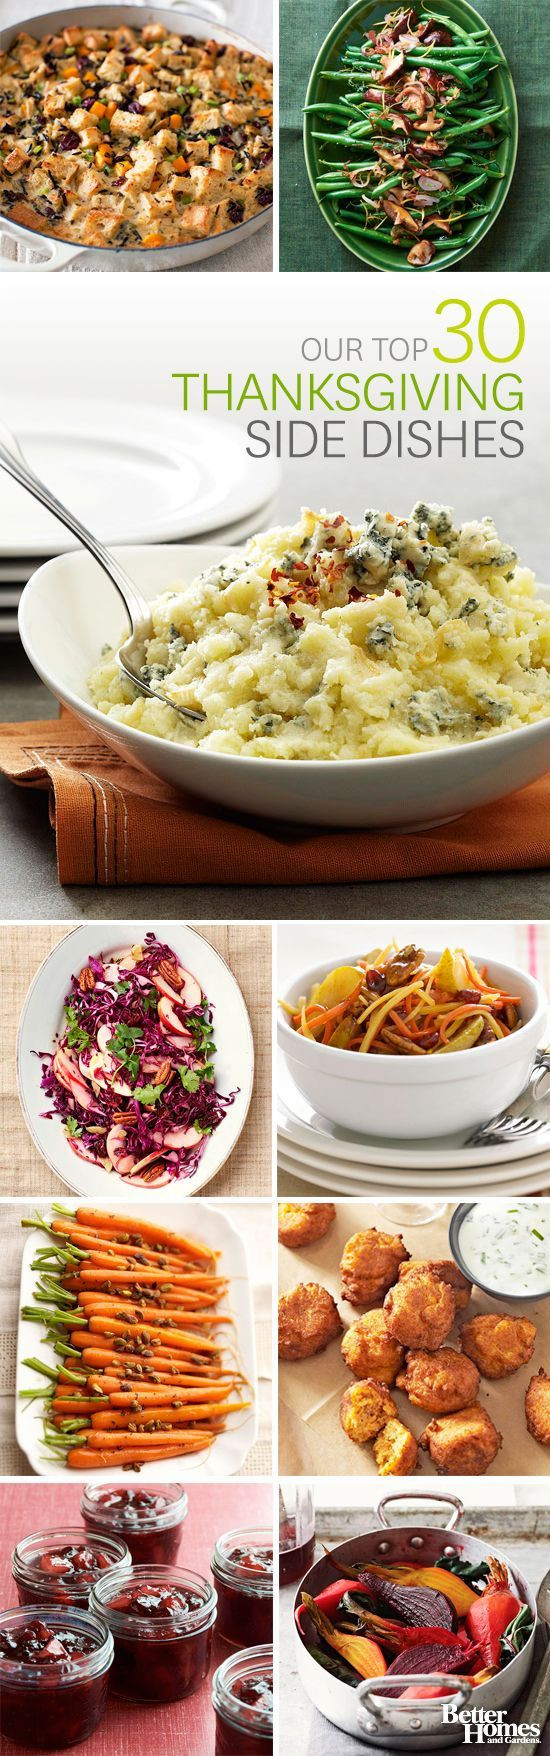 Side Dishes For Thanksgiving Dinner
 Make Ahead Holiday Side Dishes